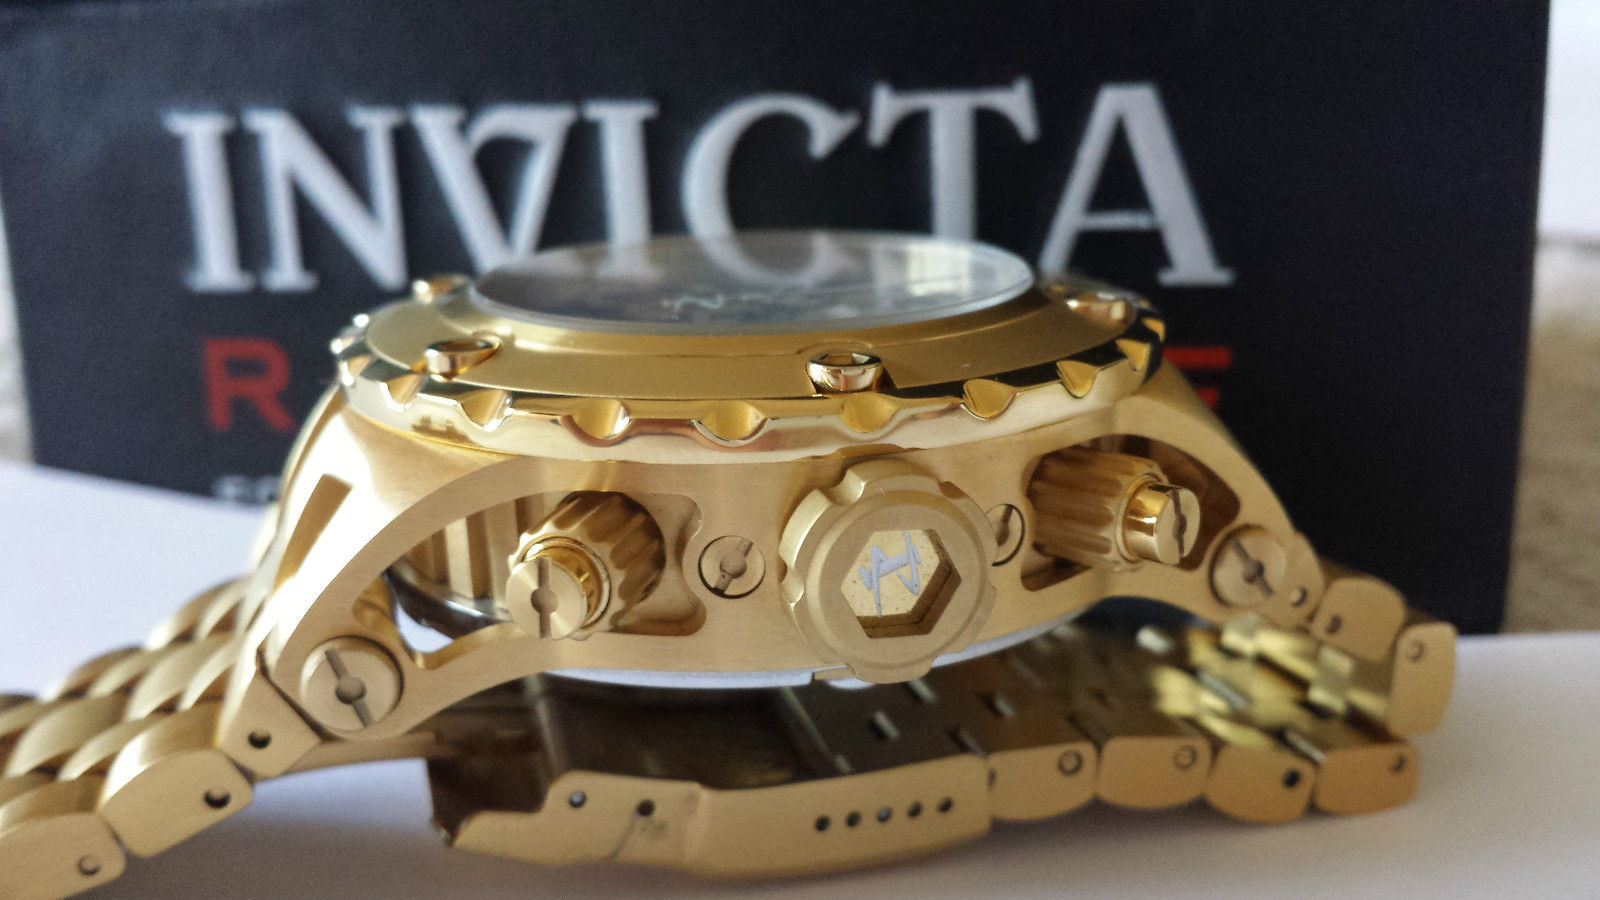 Invicta Reserve 1568 Dive Watch Gold Chronograph,boxed all papers included along with price- $4995 - Image 3 of 9